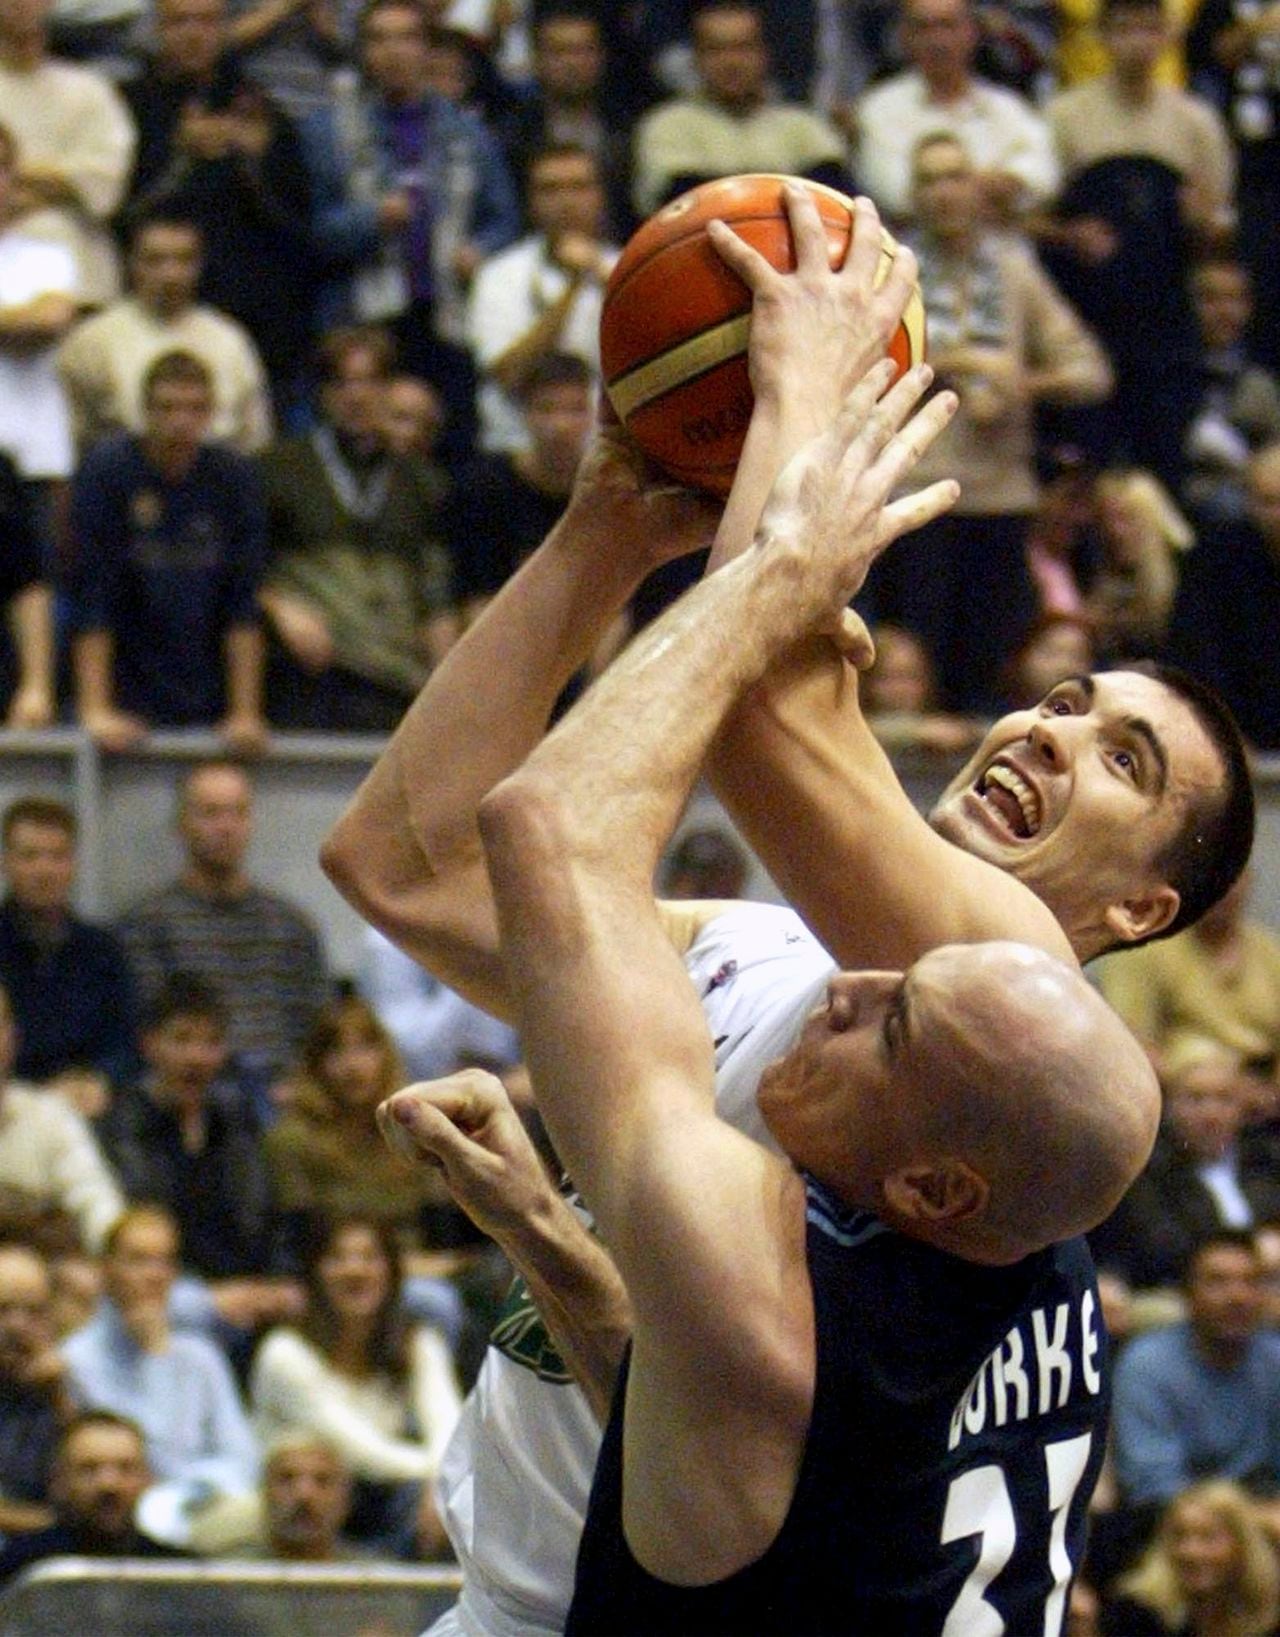 File - Real Madris's Patrick Burke, front, challenges Dejan Milojevic, of Partizan Pivara MB, for the ball during their Euroleague, group A, third round basketball match in Belgrade, Thursday, Nov. 18, 2004.